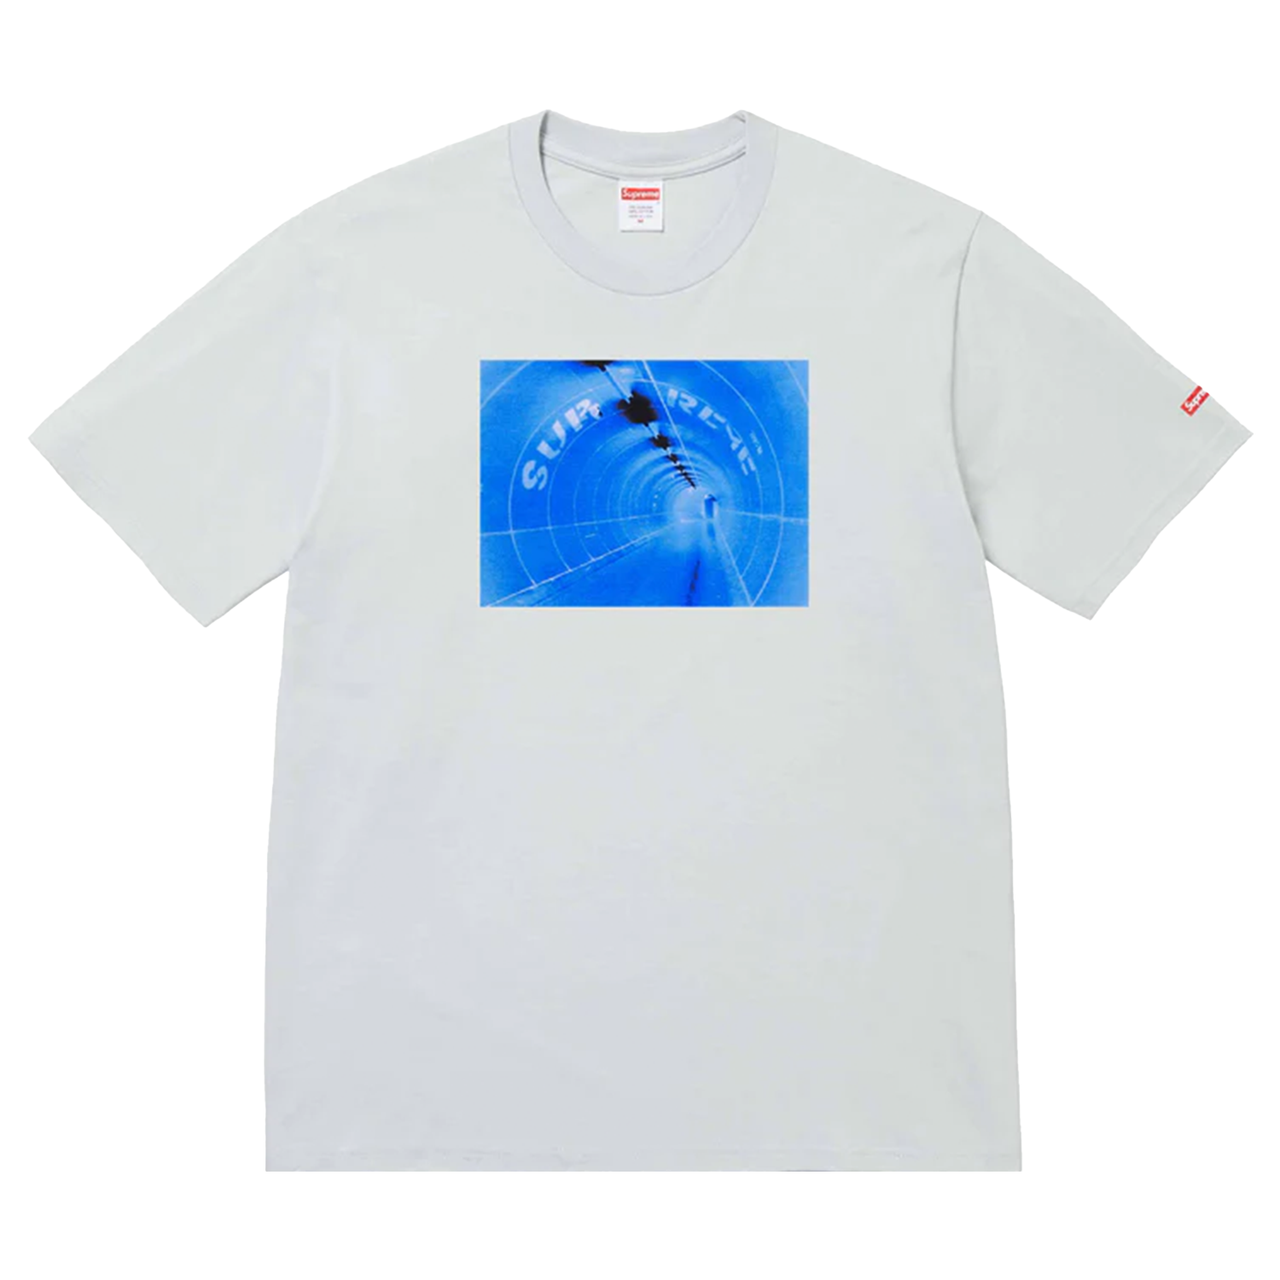 Supreme Tunnel Tee Cement